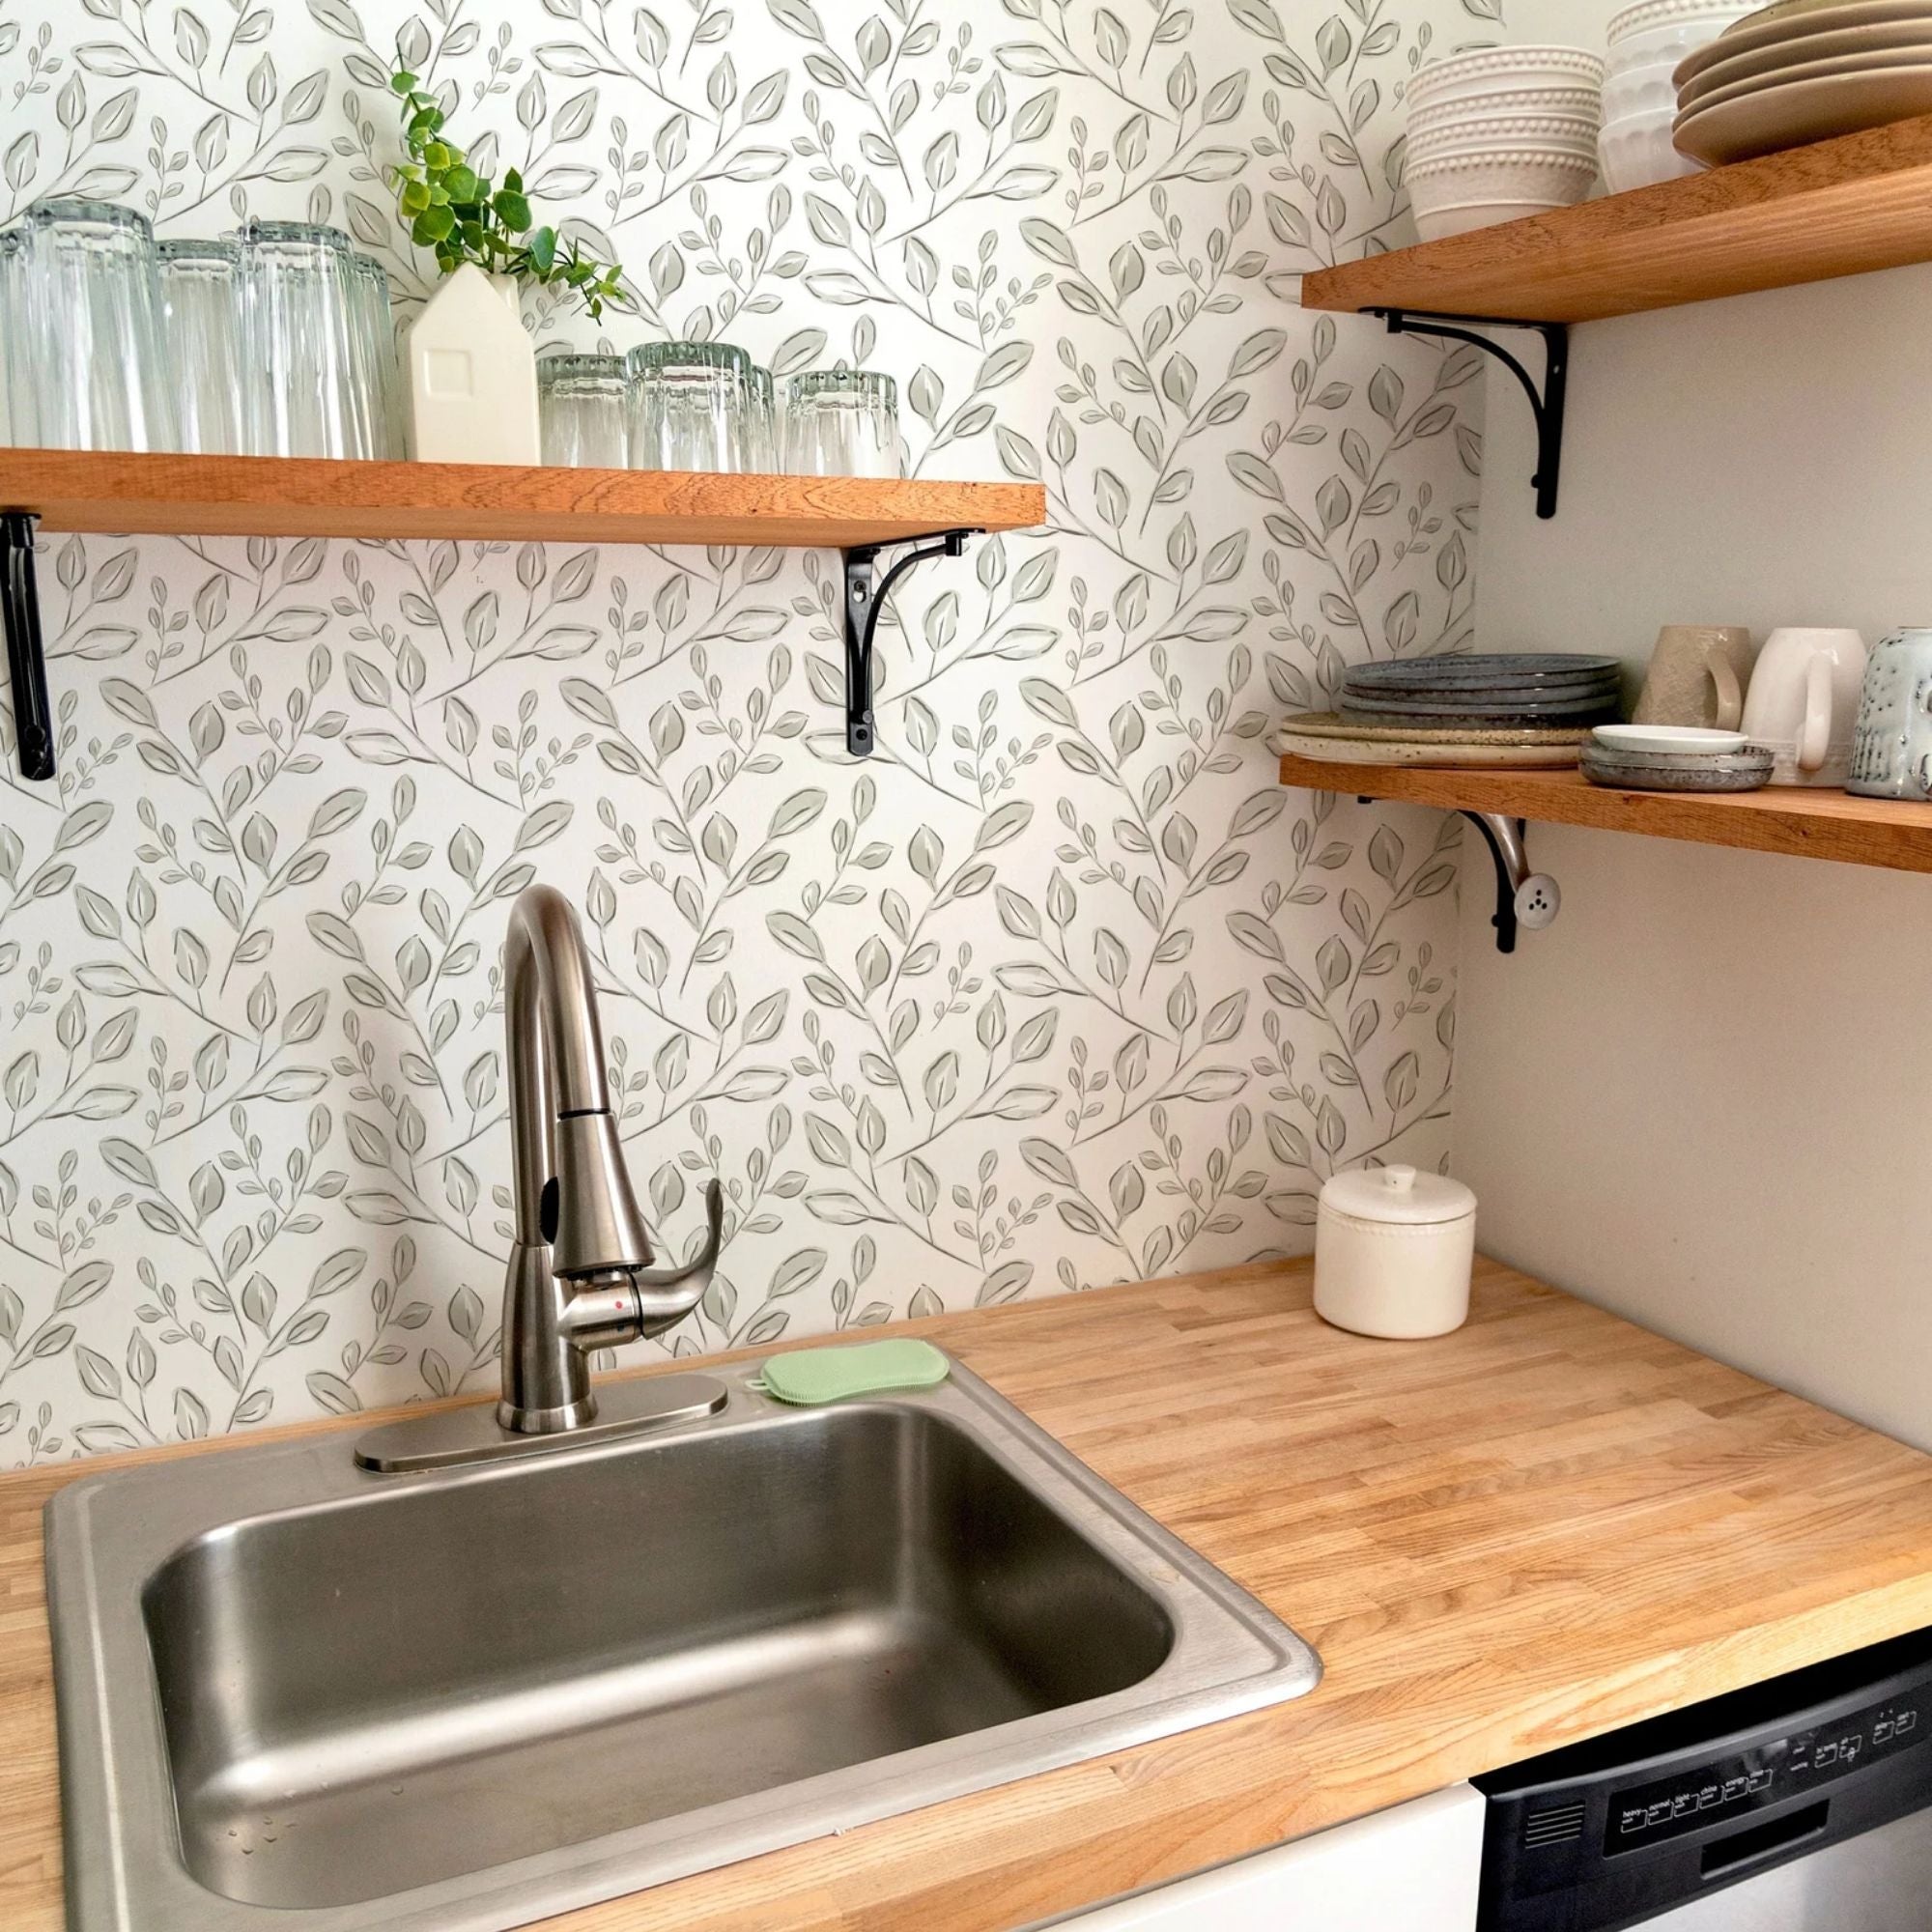 A kitchen corner with a sink under wooden shelves, set against a backdrop of Sweet Watercolour Floral Wallpaper. The gentle floral design on the wallpaper adds a warm and inviting touch to the functional space.